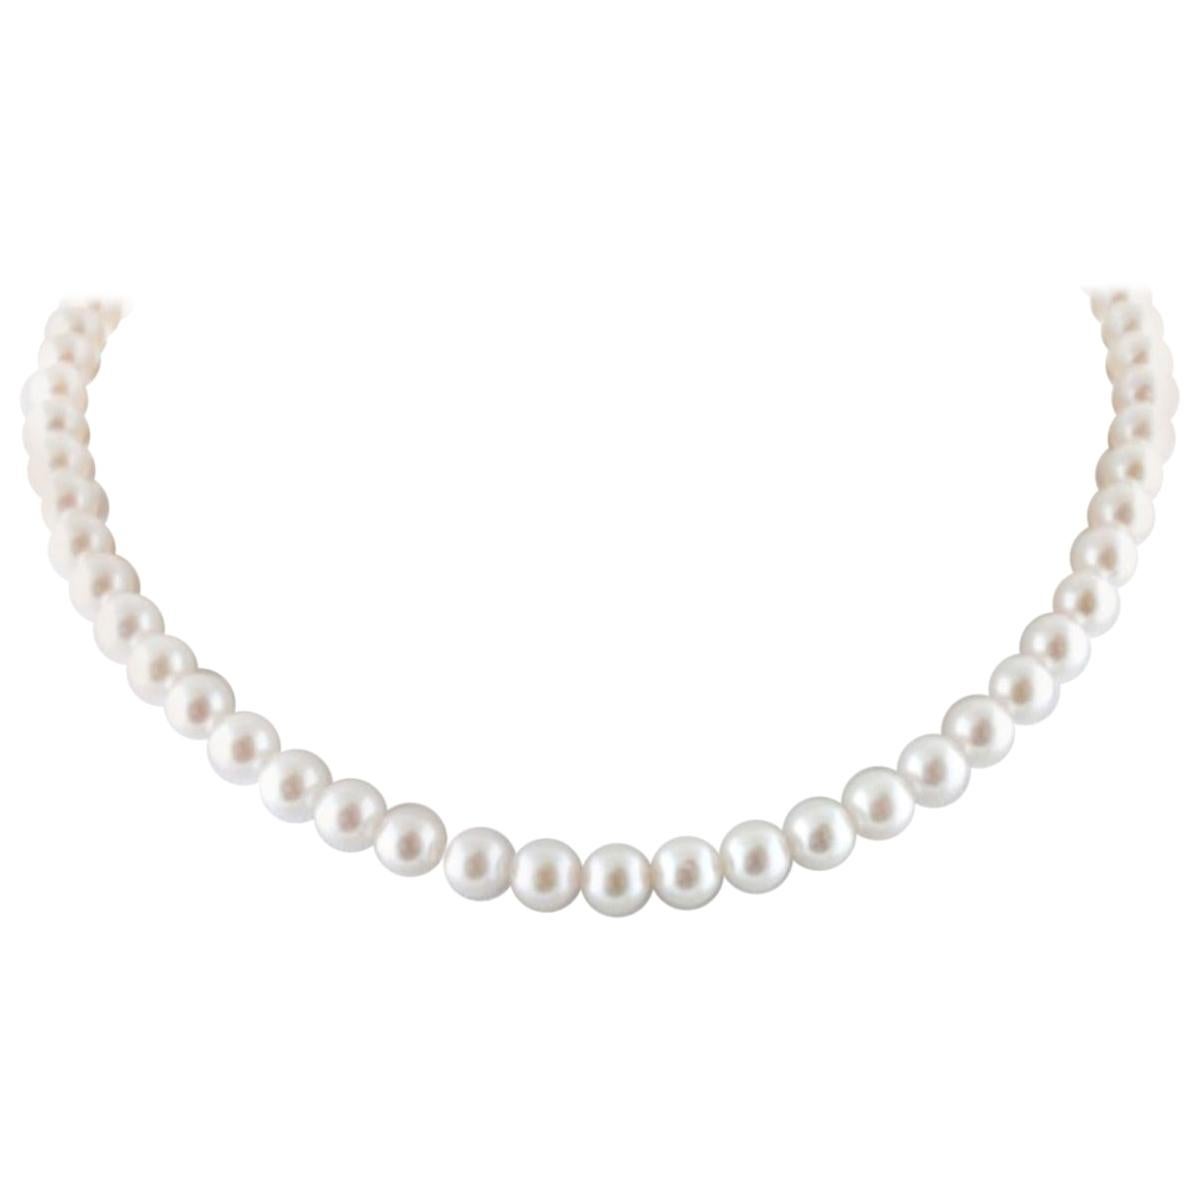 Pearl Necklace with 18 Karat Yellow Gold Closure